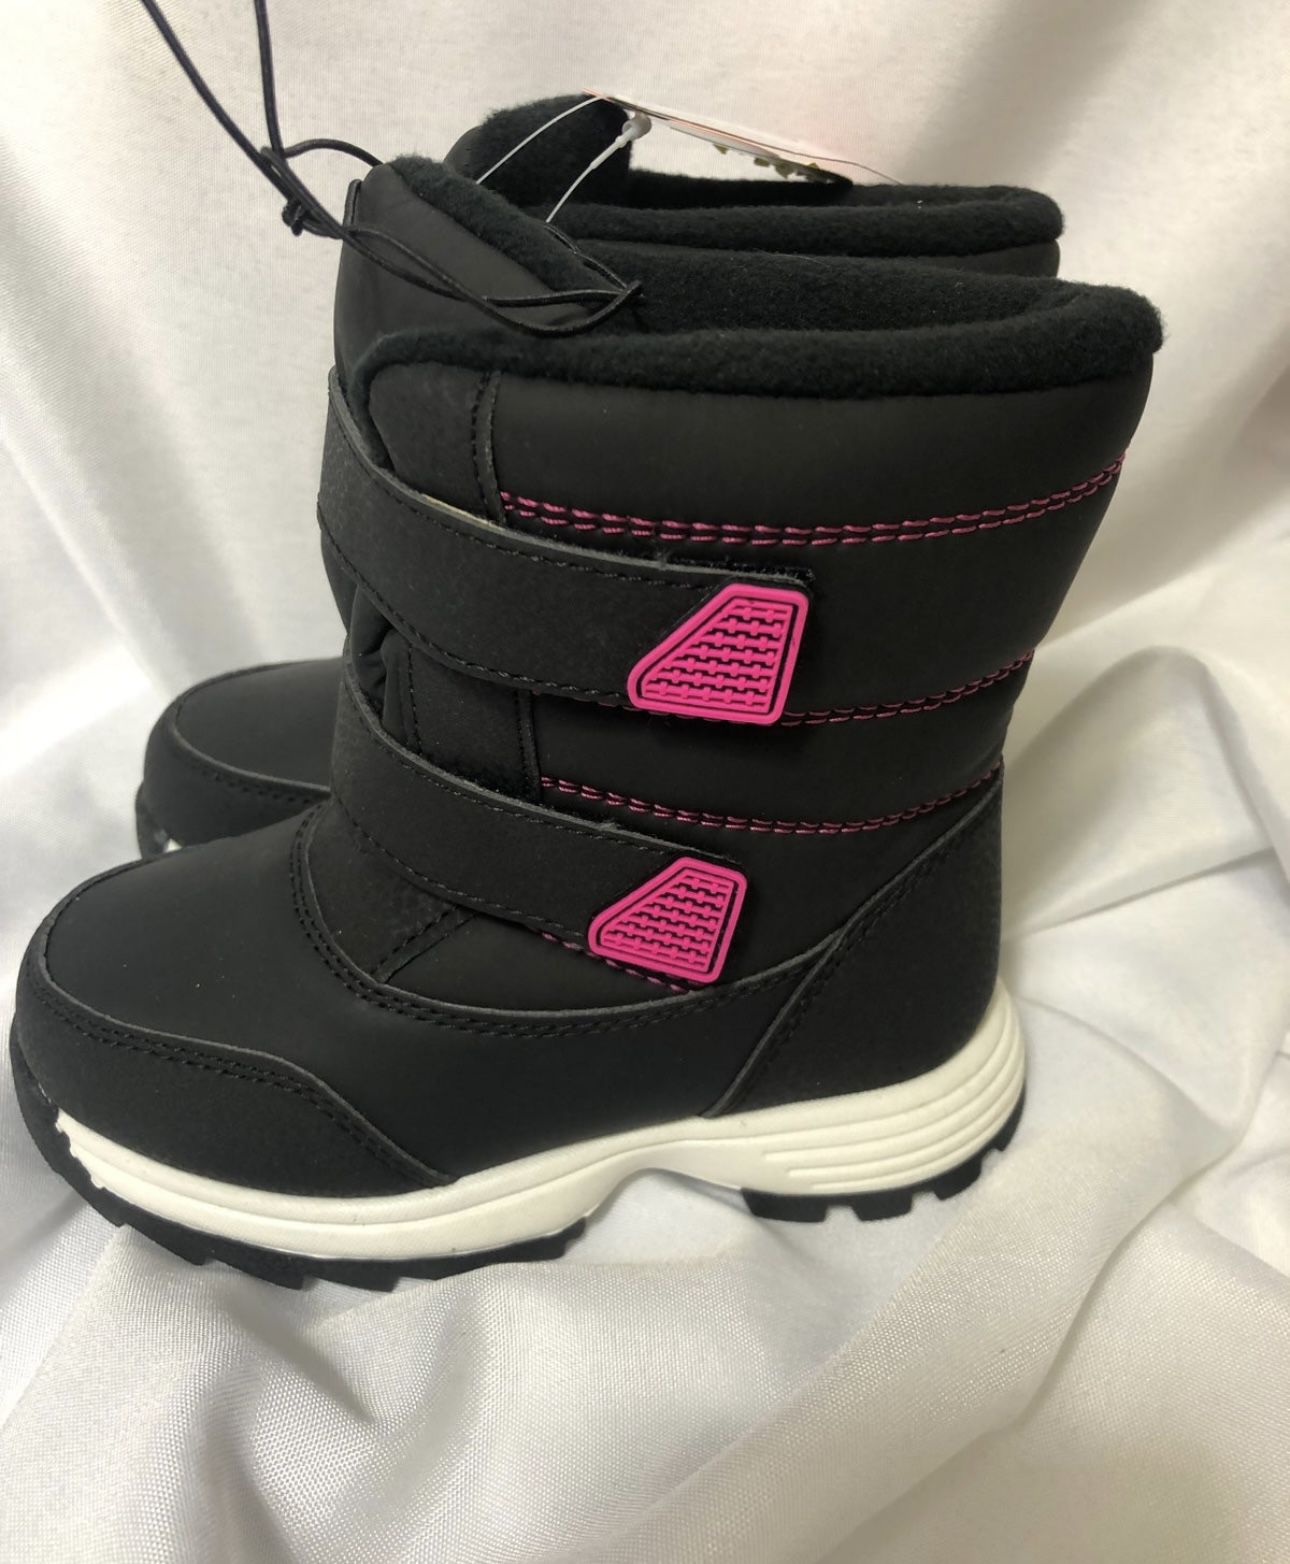 Wonder nation new with tags toddler Girls   snow boots ❄️❄️-Size 9